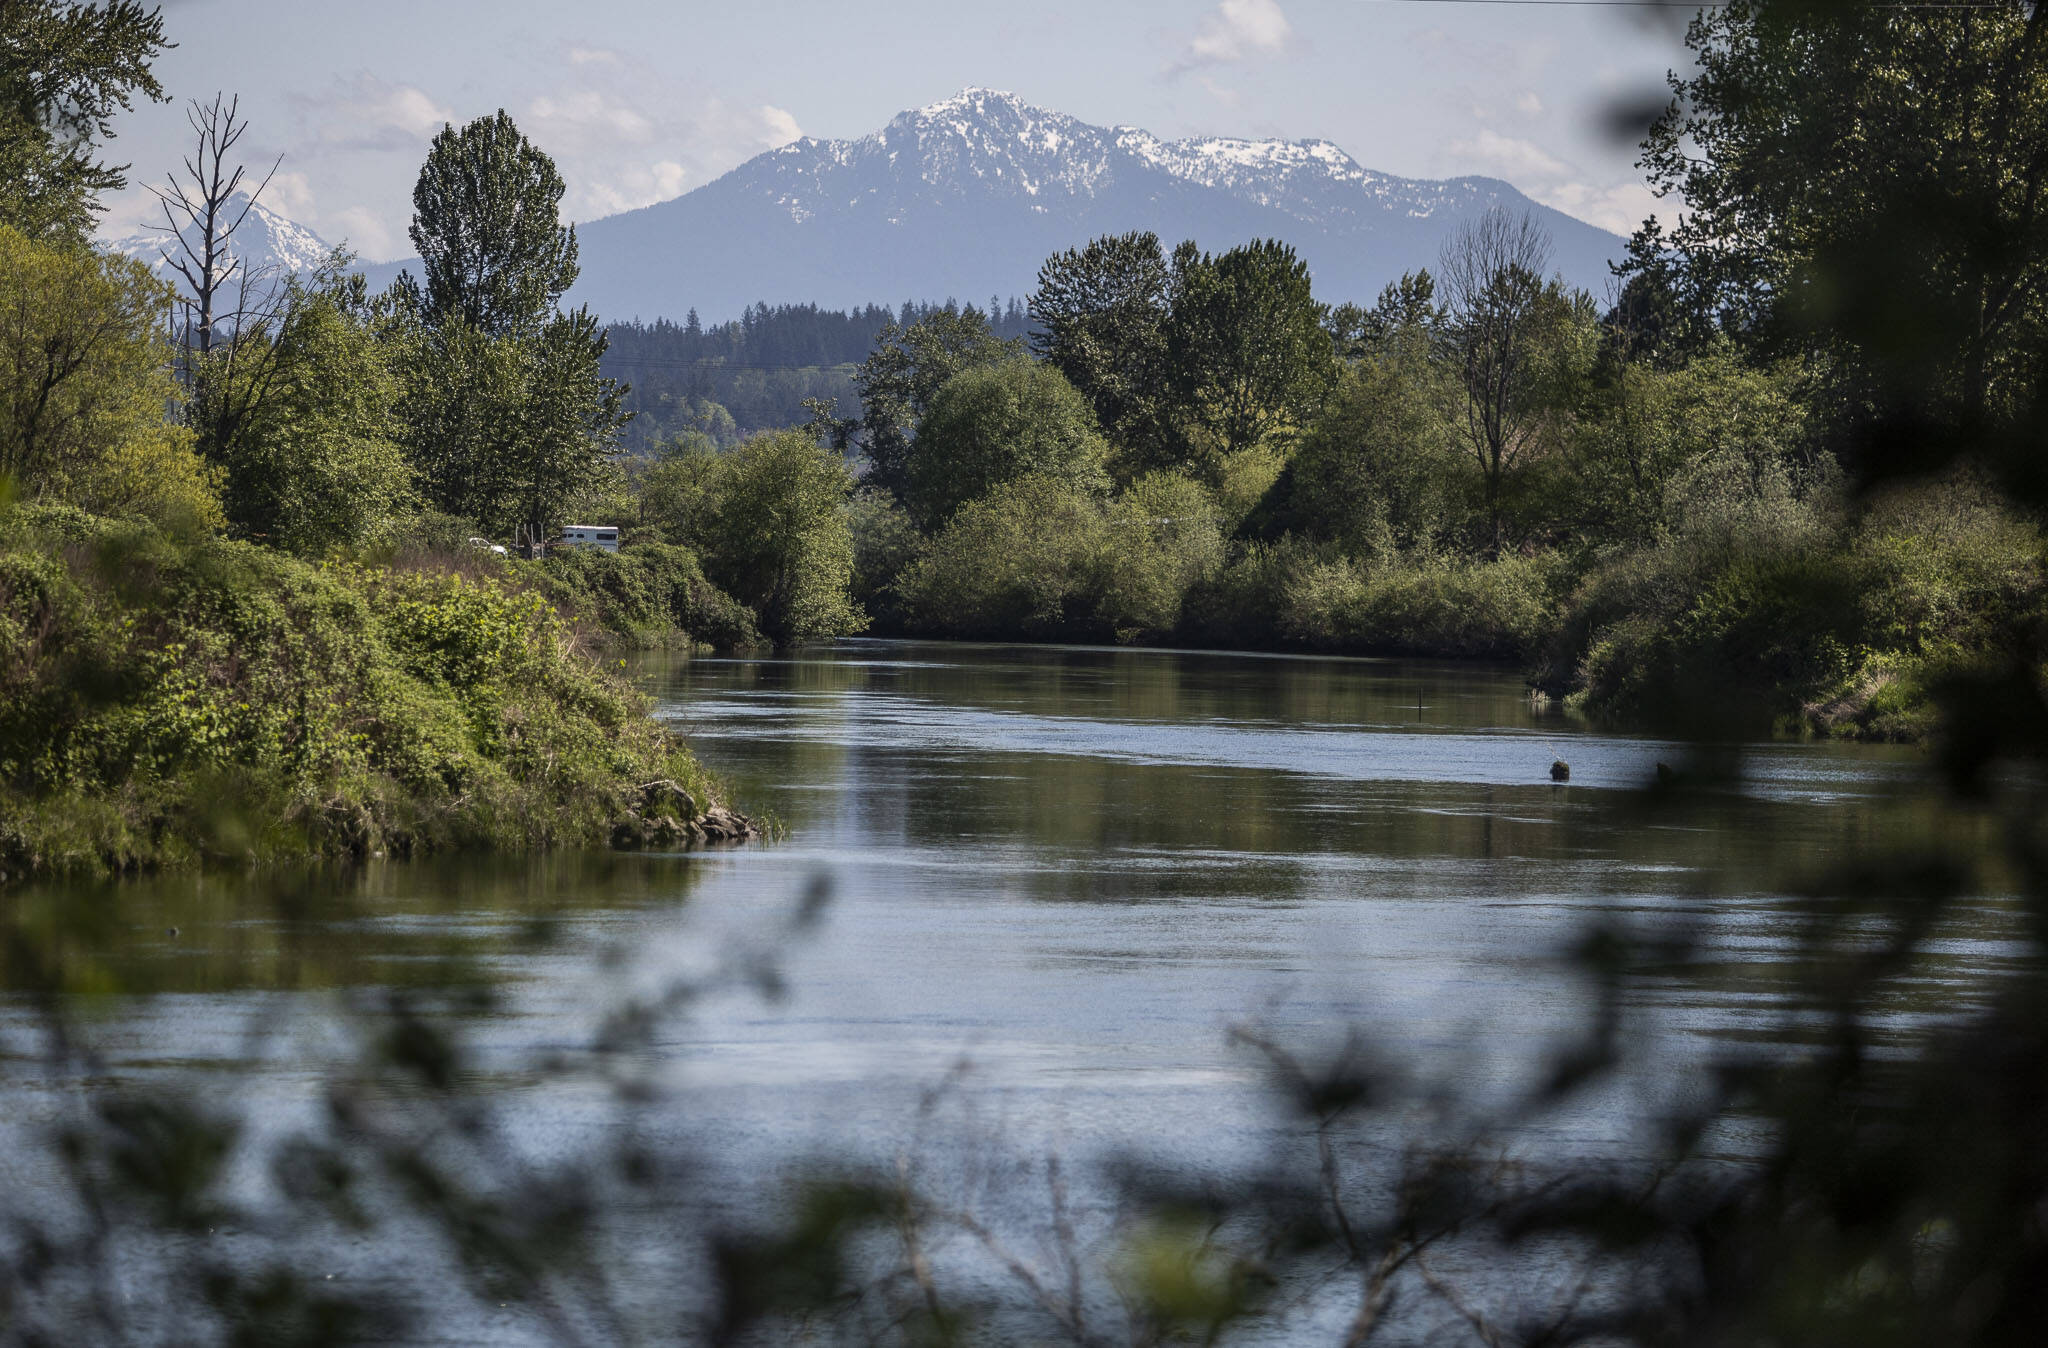 Snow is visible along the top of Mount Pilchuck from bank of the Snohomish River on Wednesday, May 10, 2023 in Everett, Washington. (Olivia Vanni / The Herald)